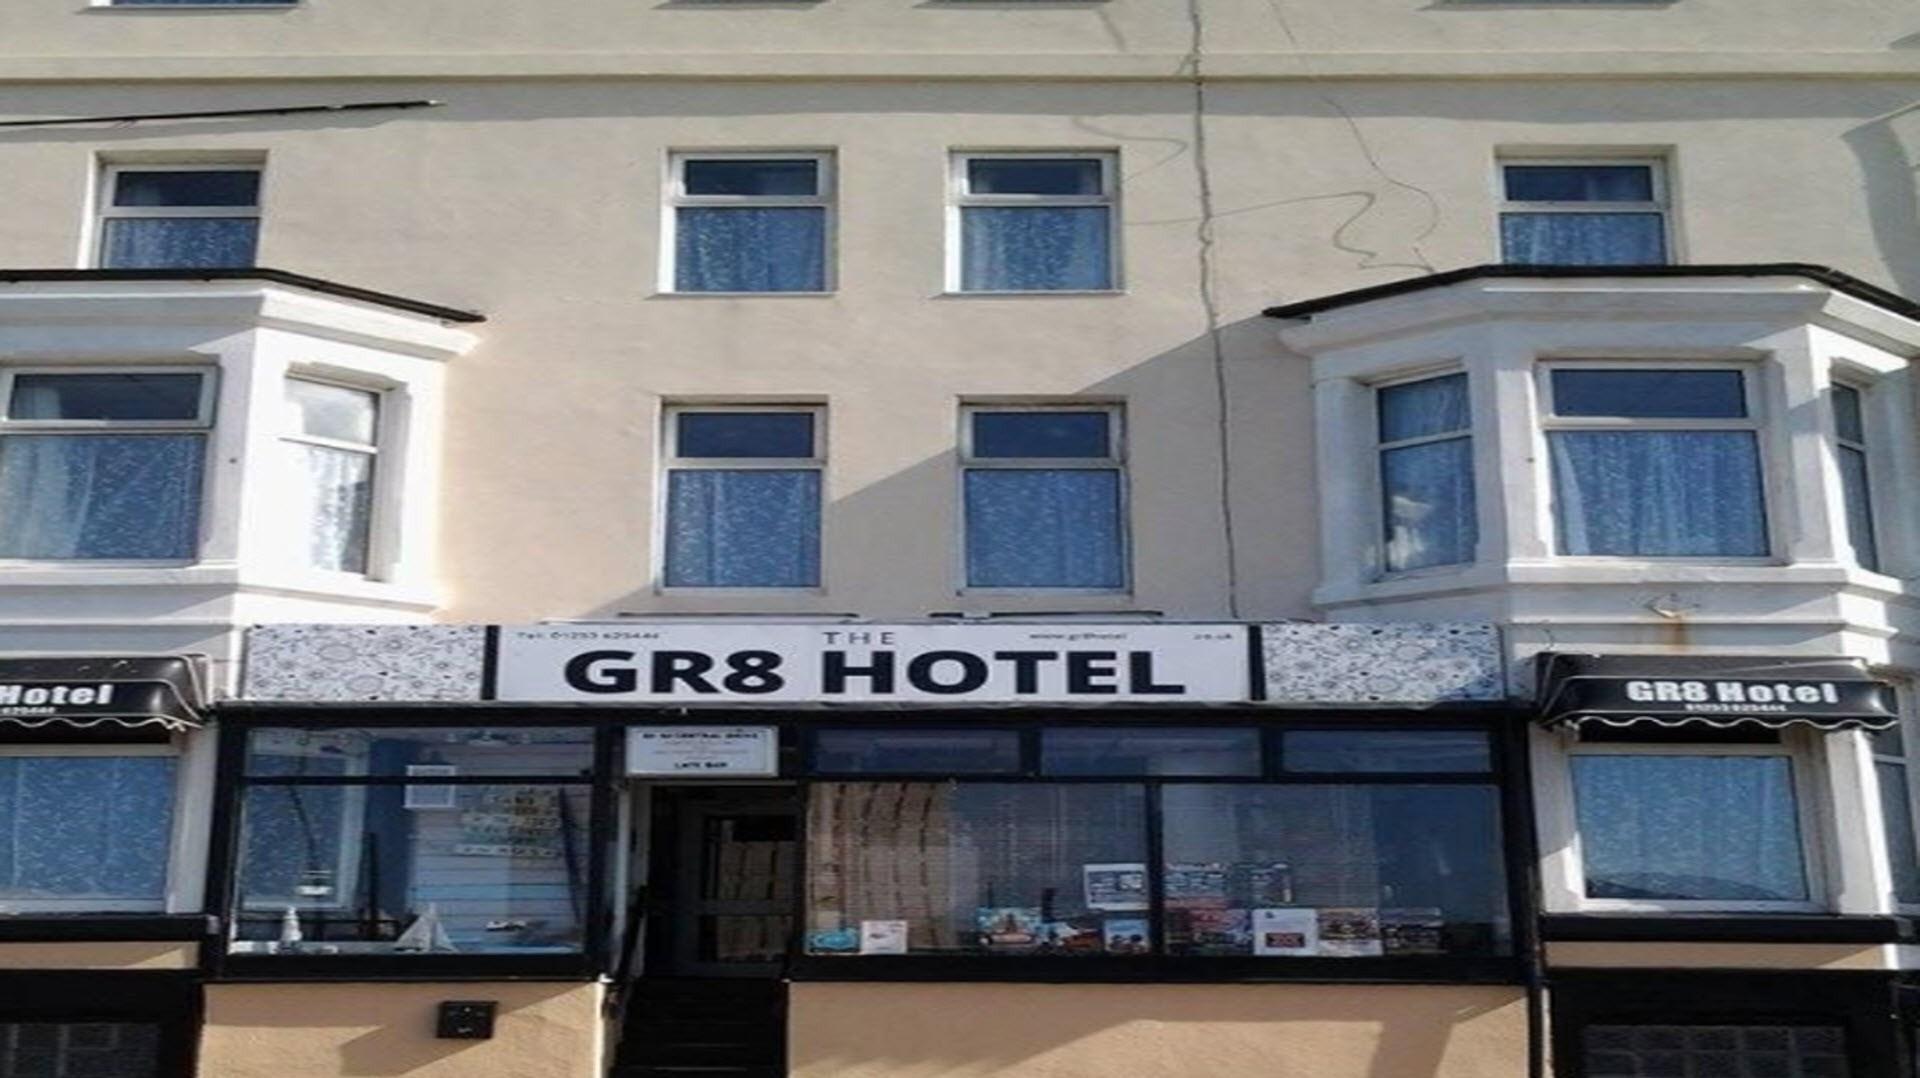 The GR8 hotel in Blackpool, GB1